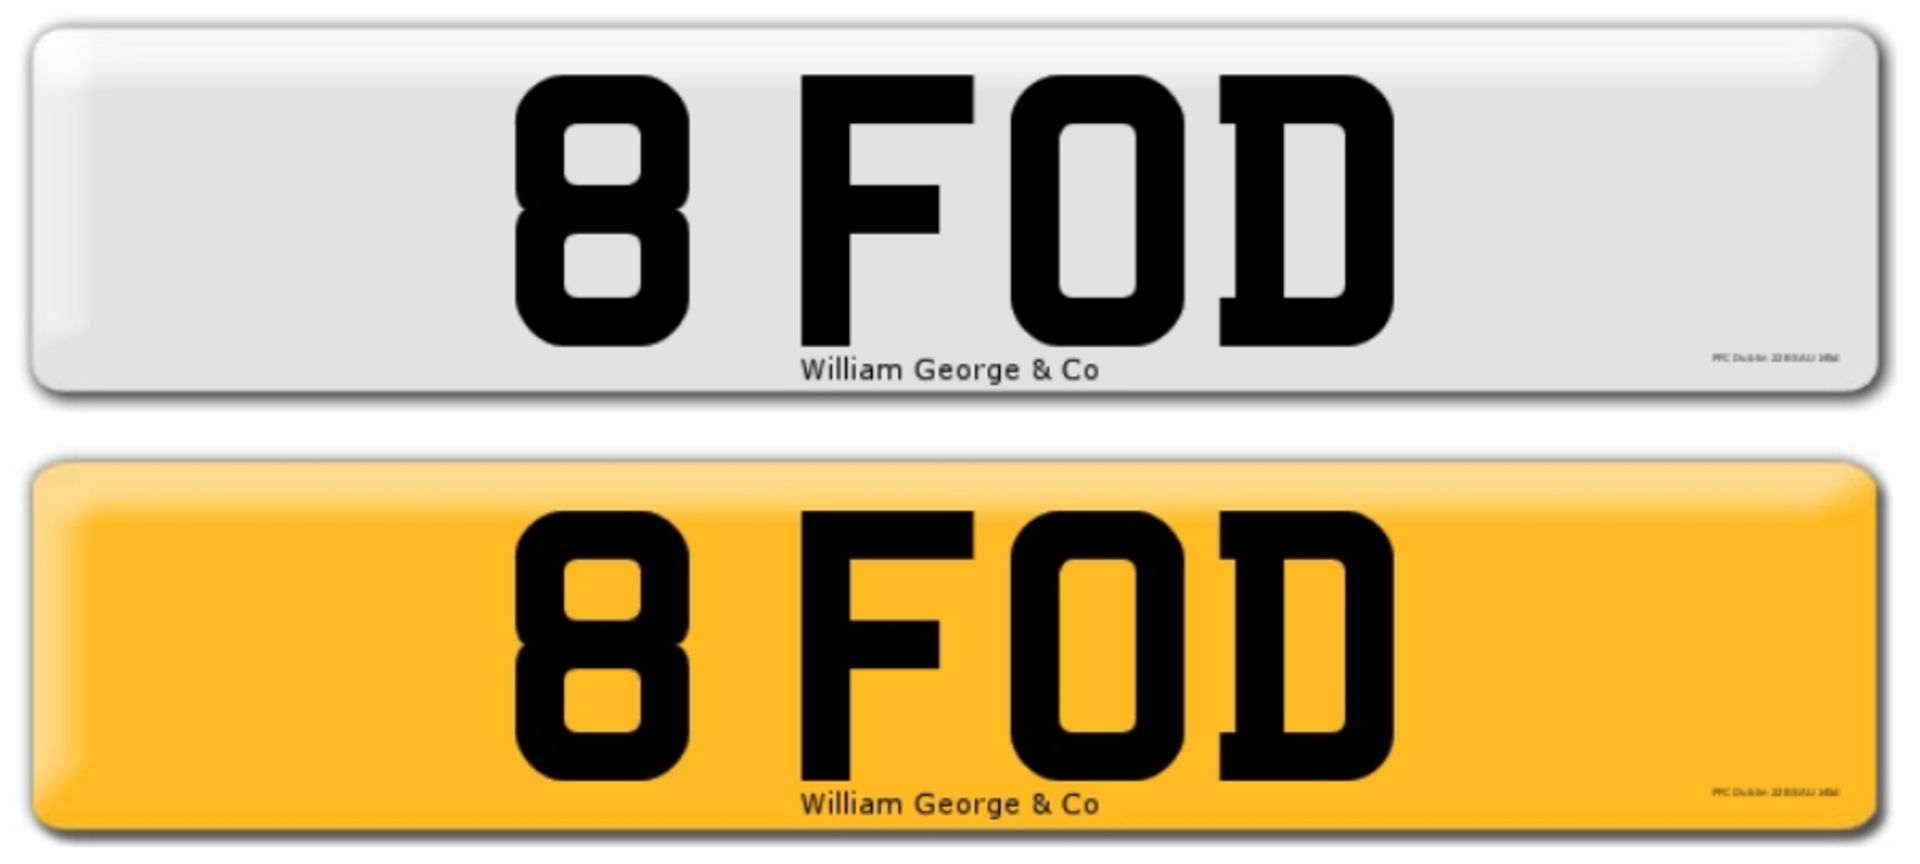 Registration on DVLA retention certificate, ready to transfer 8 FOD, This number plate /